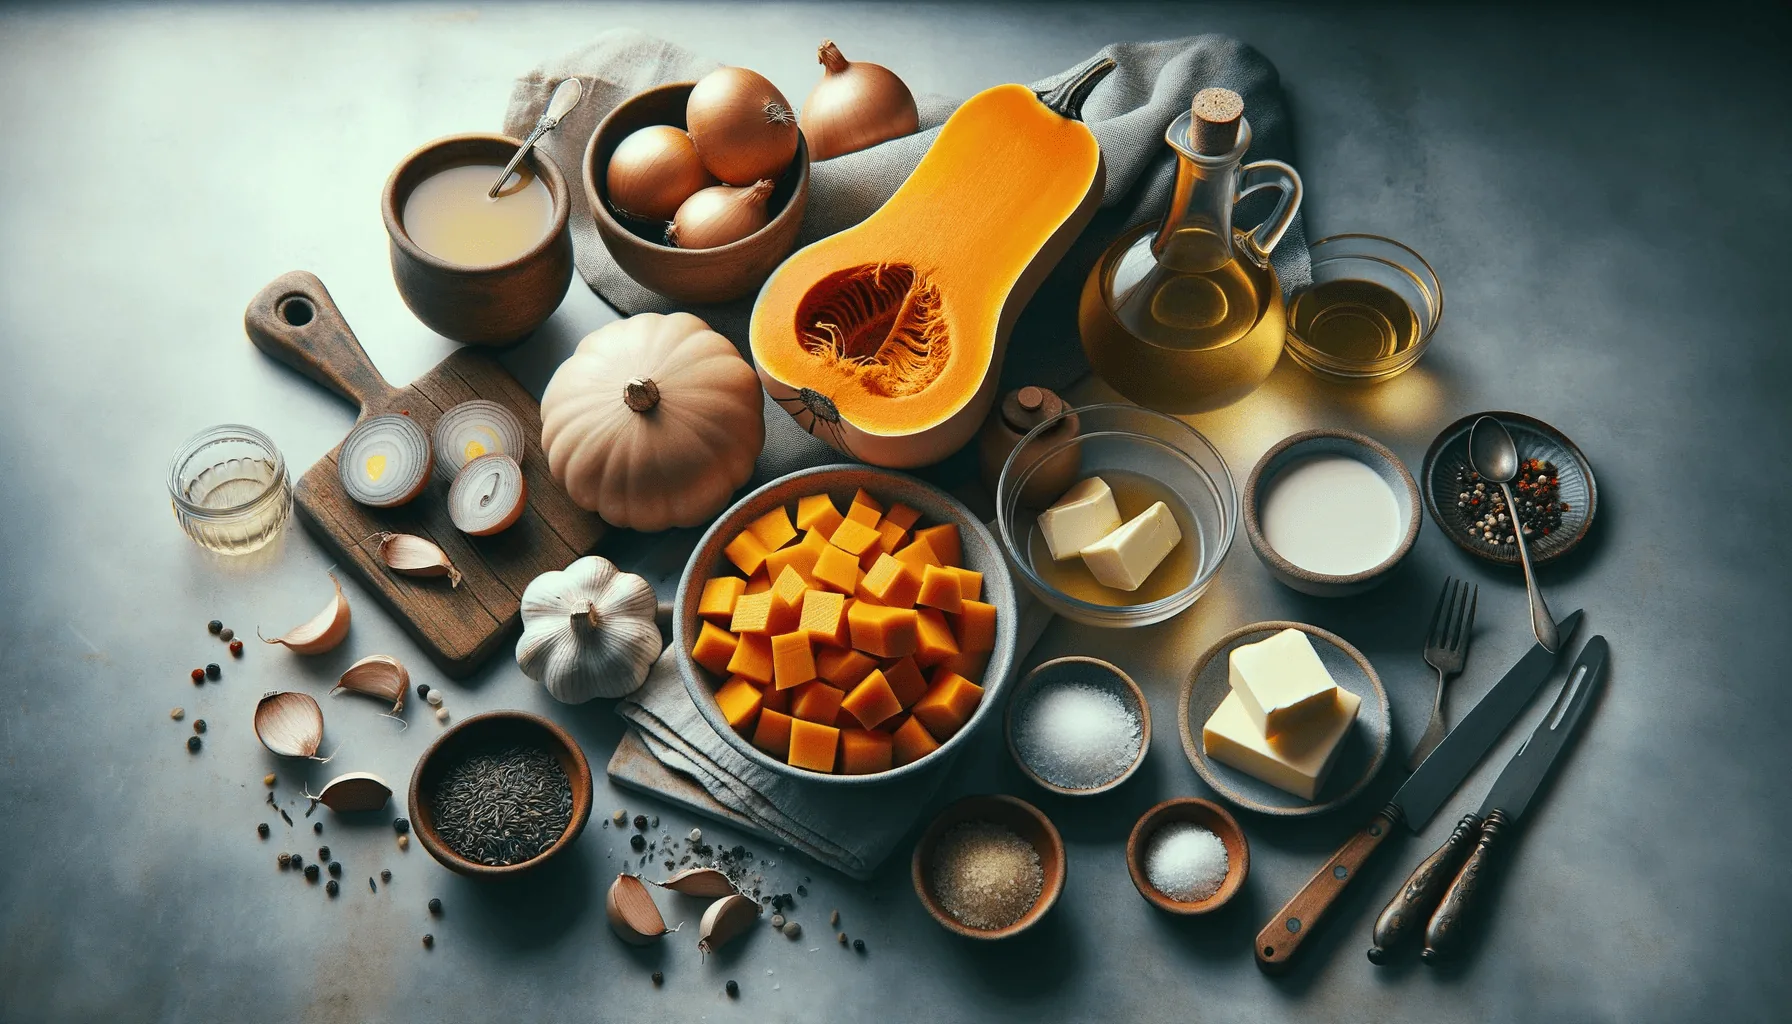 The ingredients for my simple butternut squash soup recipe